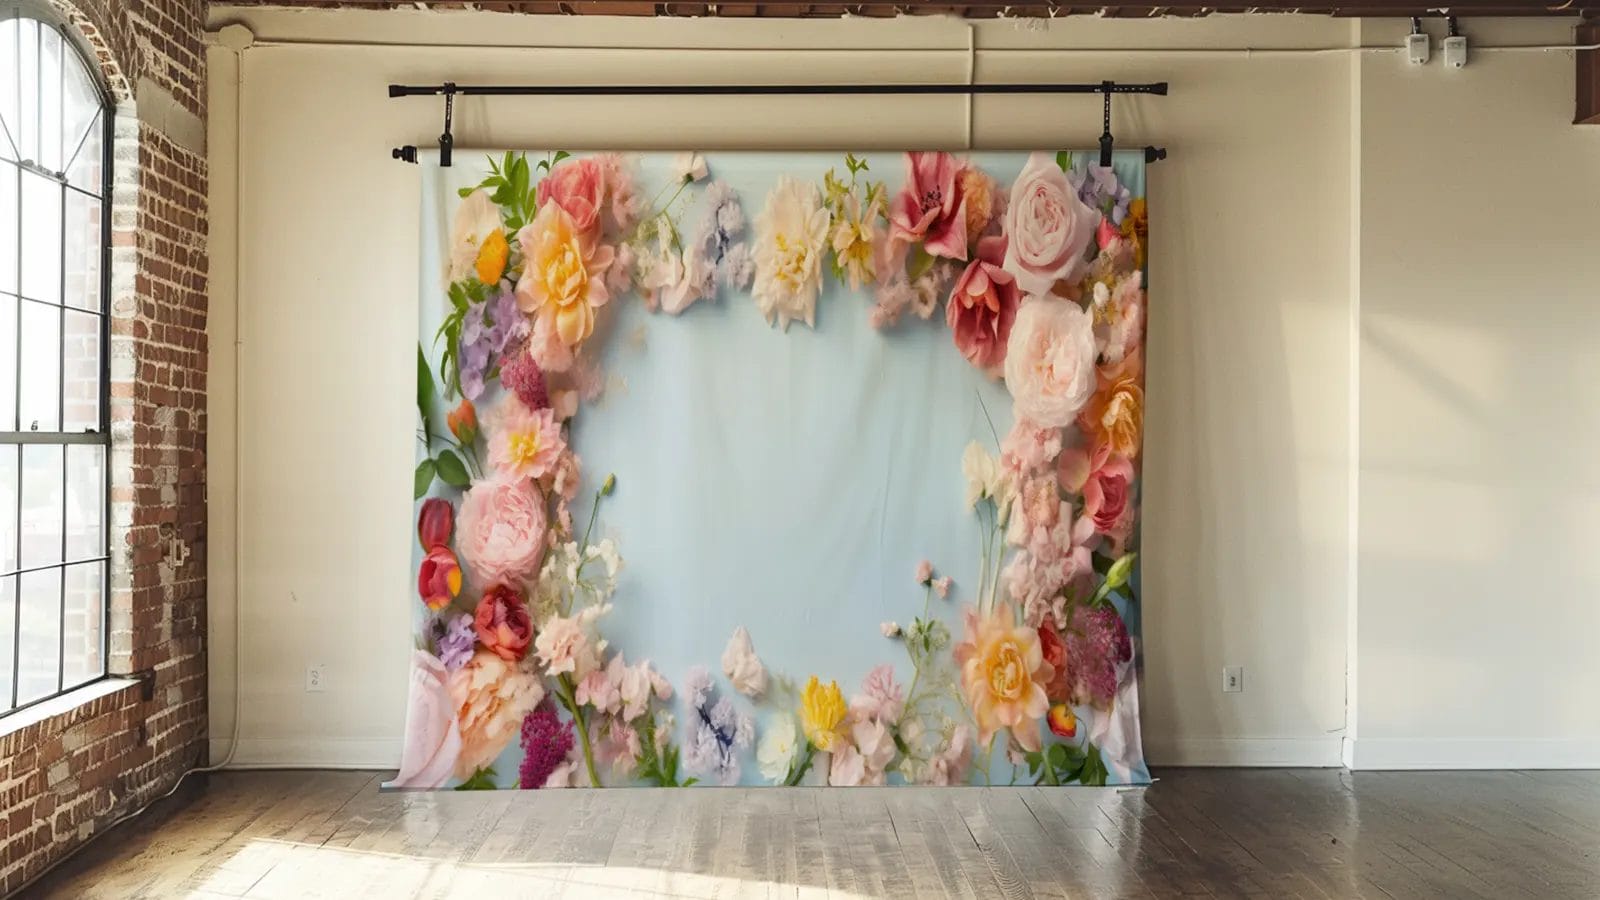 How to Hang a Backdrop on a Wall